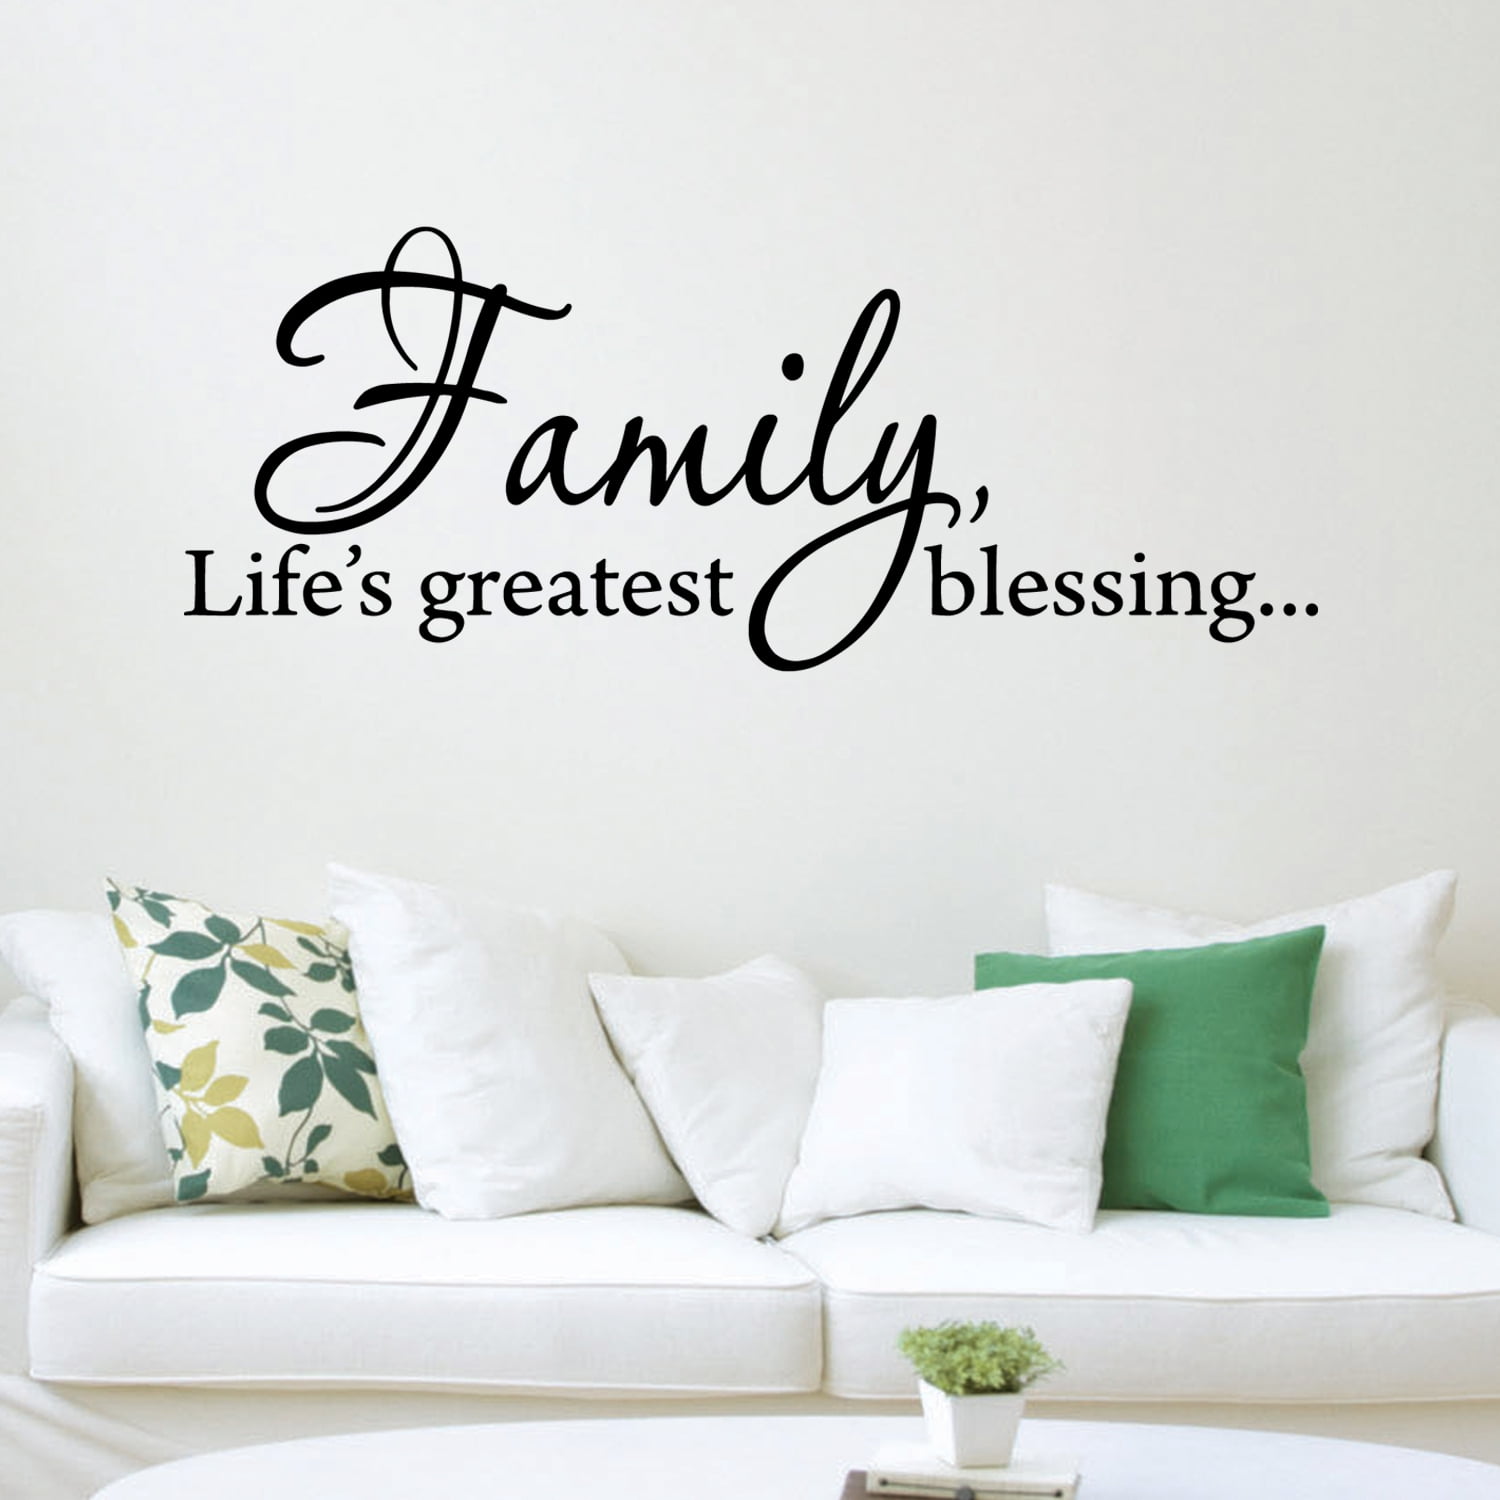 Family is a Gift Forever vinyl wall decal quote sticker decor Inspirational 